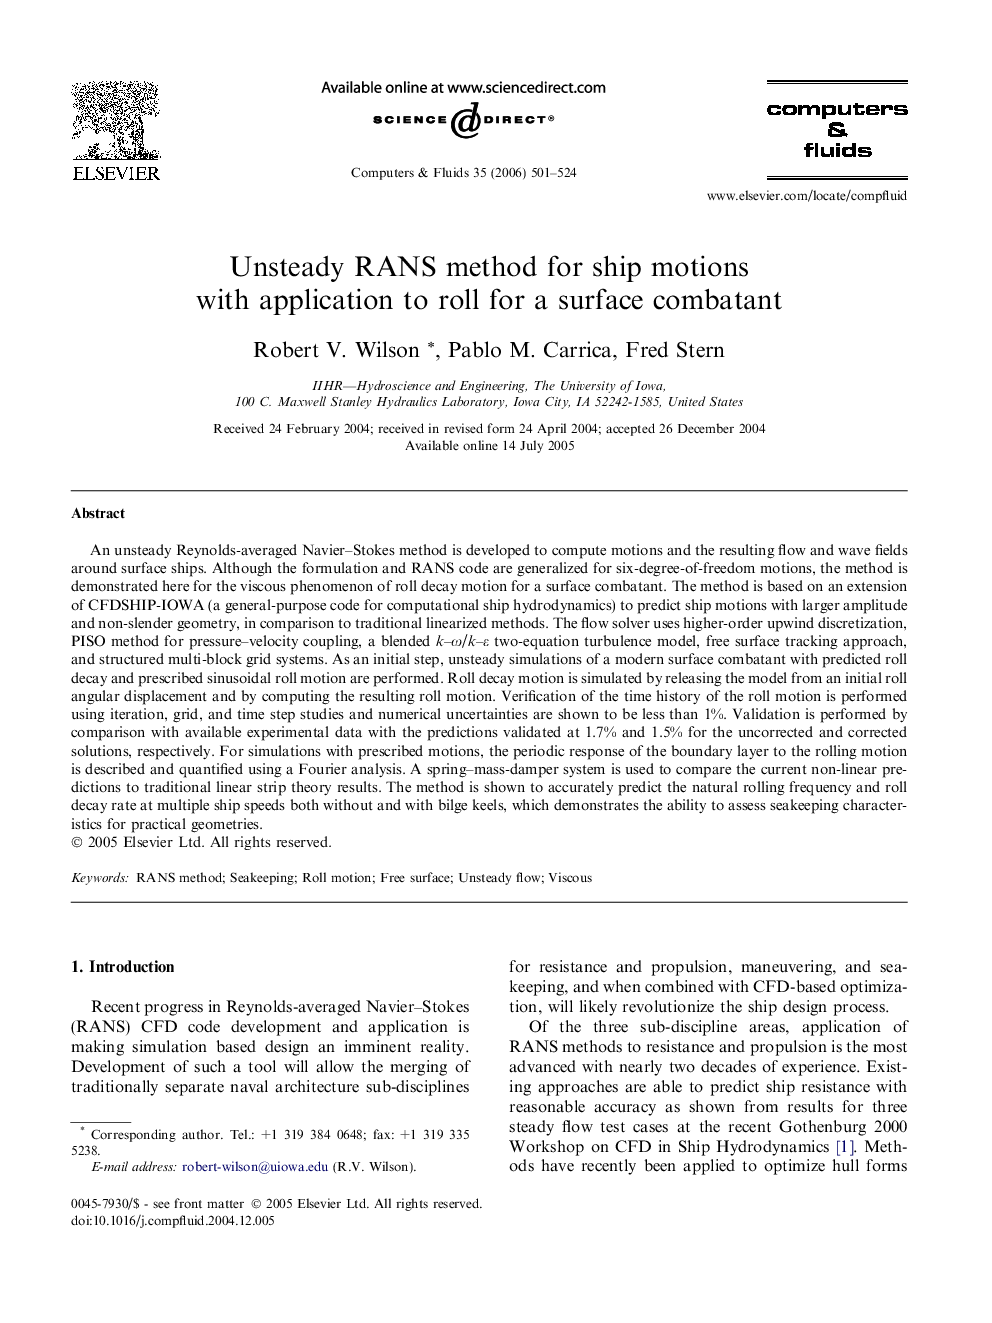 Unsteady RANS method for ship motions with application to roll for a surface combatant